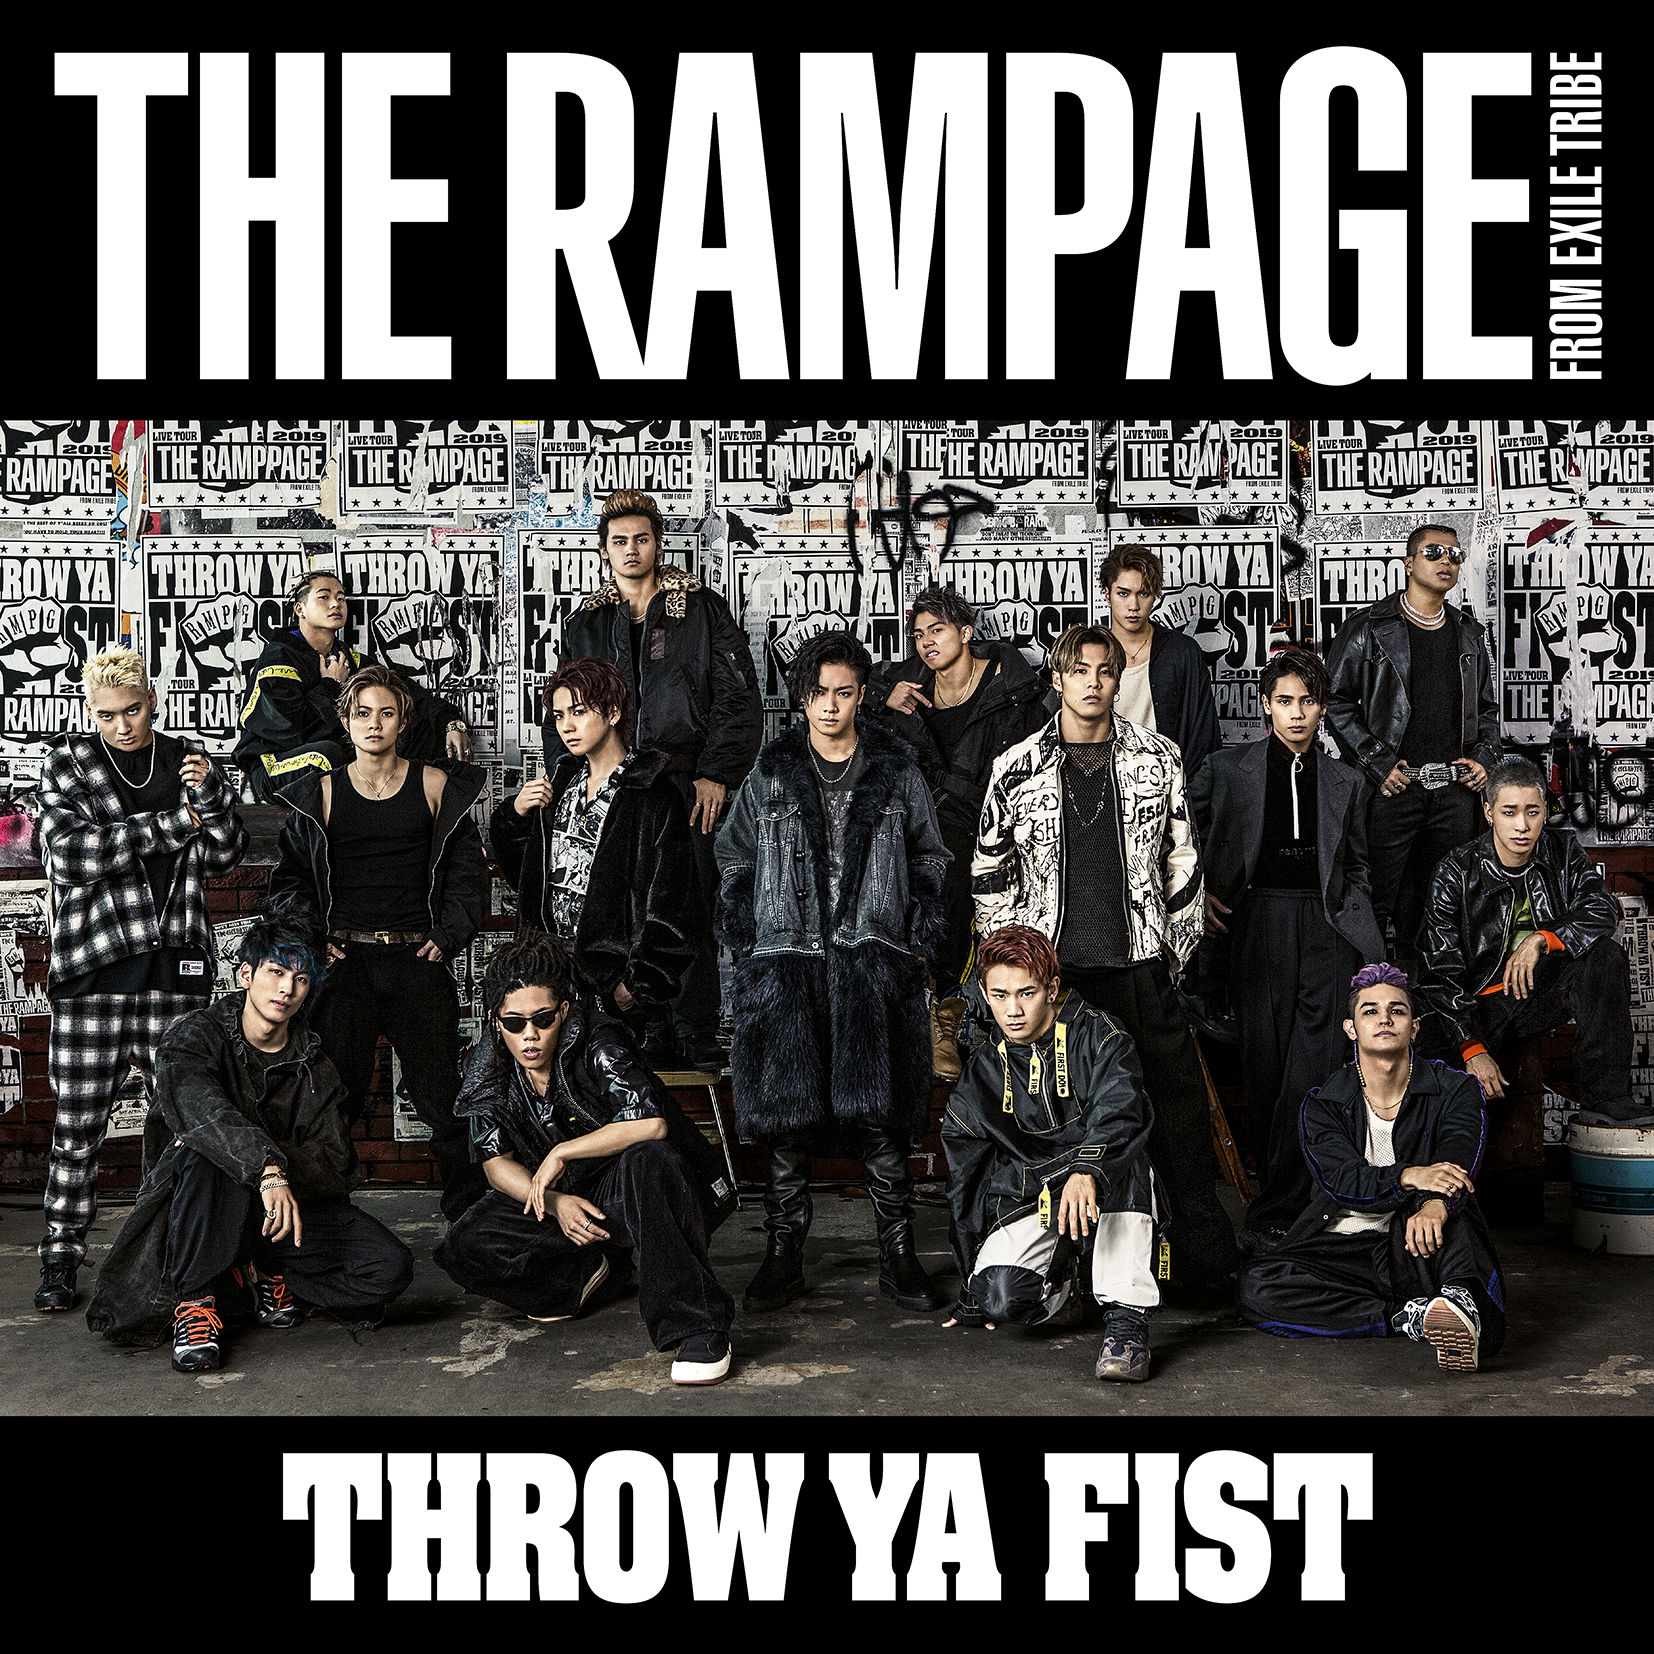 THE RAMPAGE From EXILE TRIBE - DOWN BY LAW